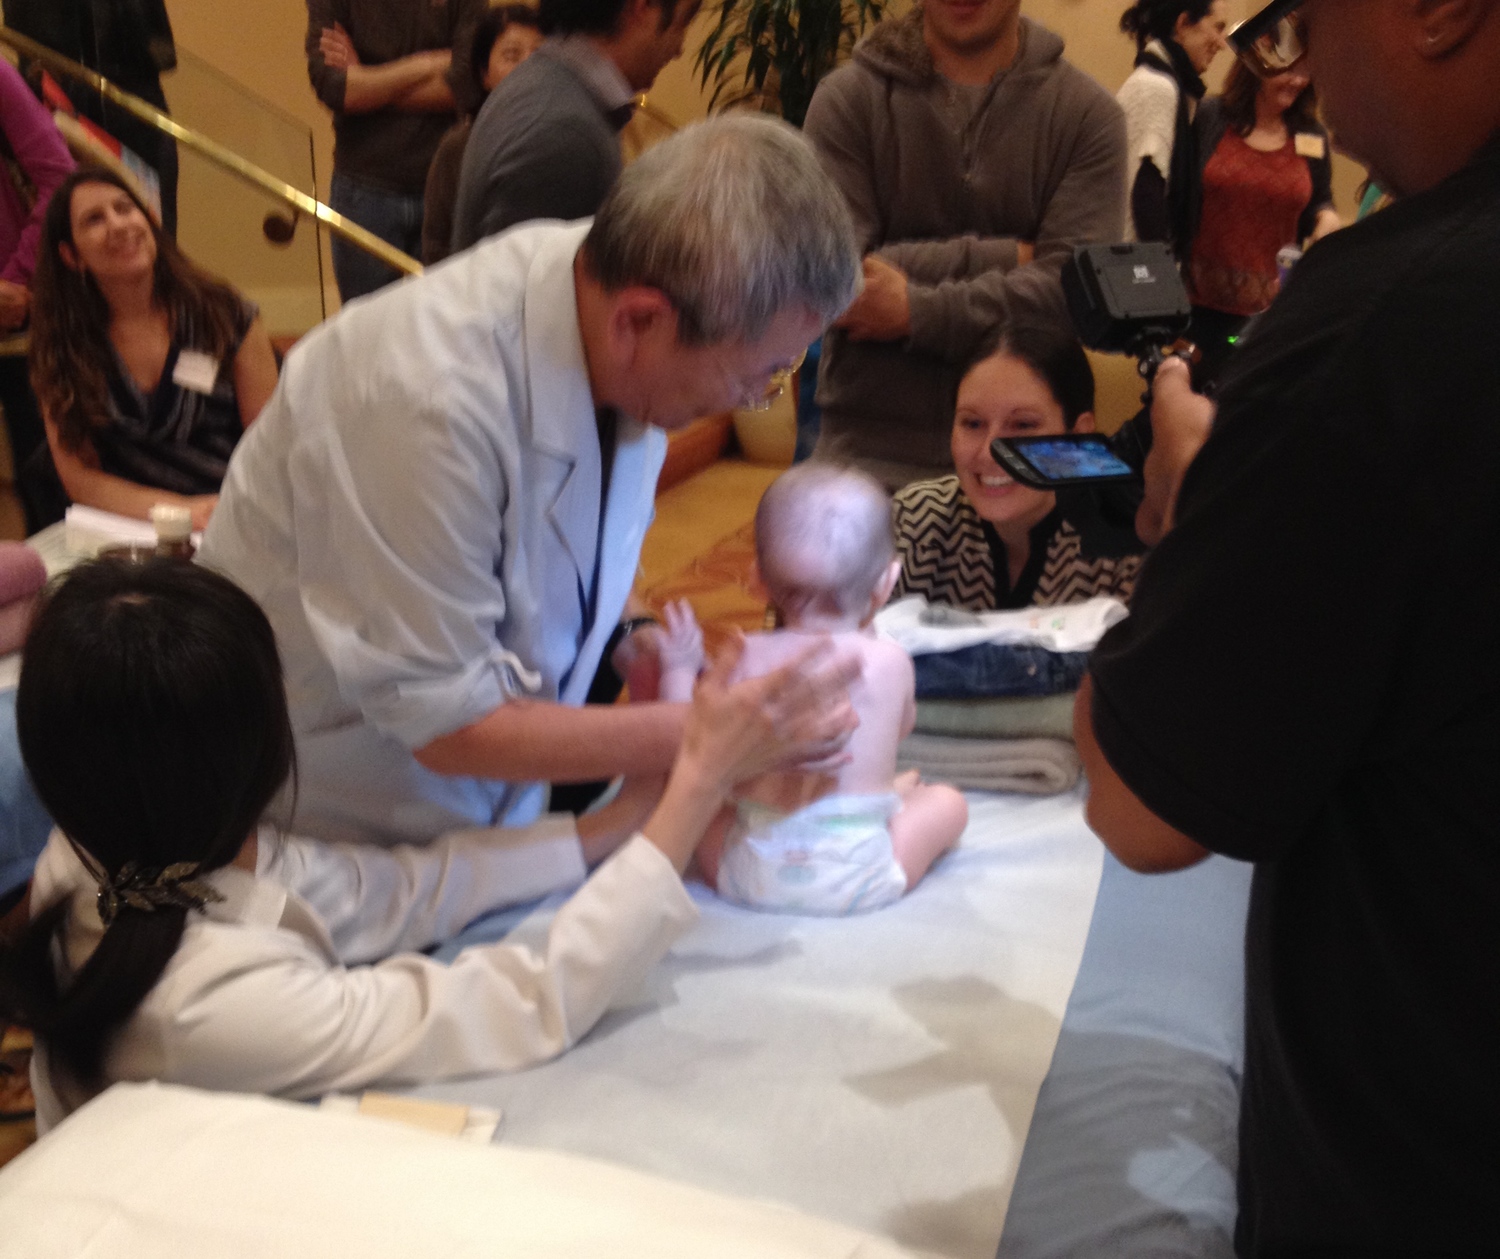 Ikeda Sensei treating a pediatric patient.  We happen to get two pediatric patients during our seminar.  What a treat!   